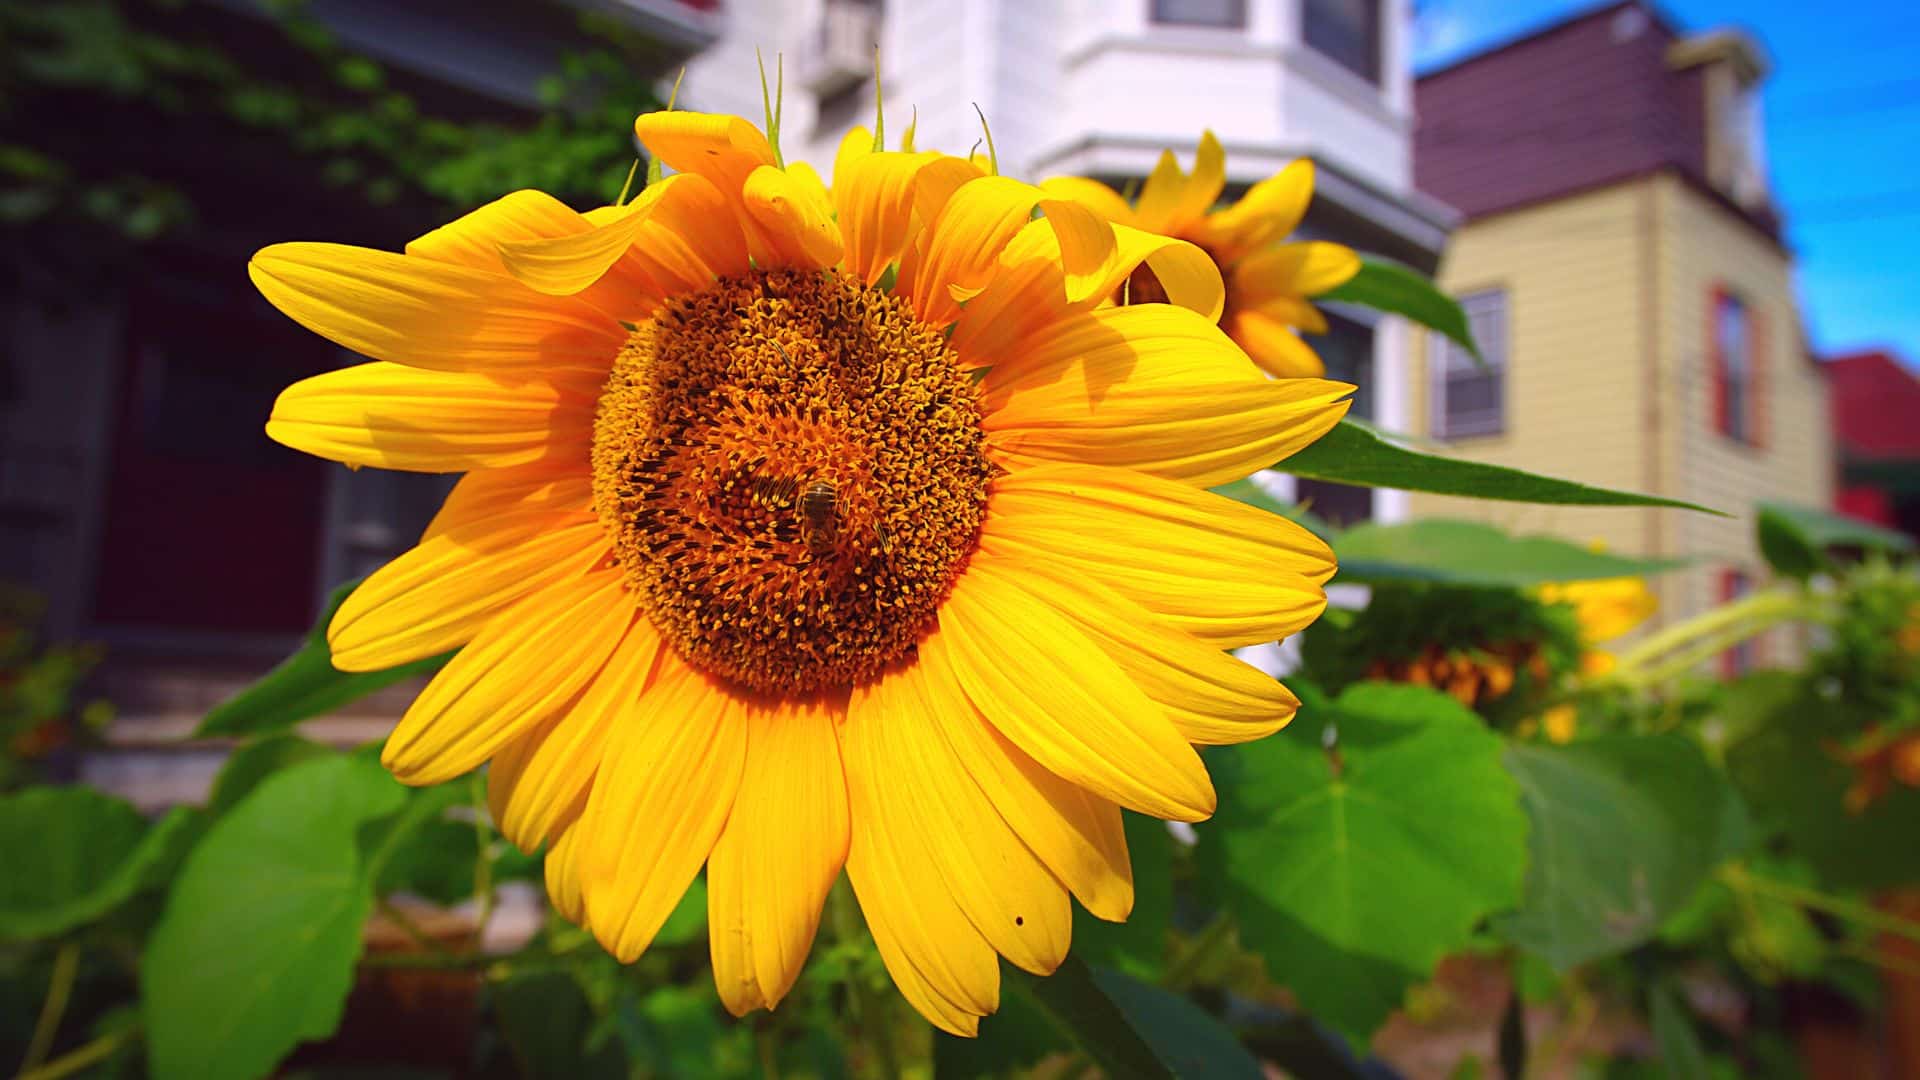 Home with Sunflowers